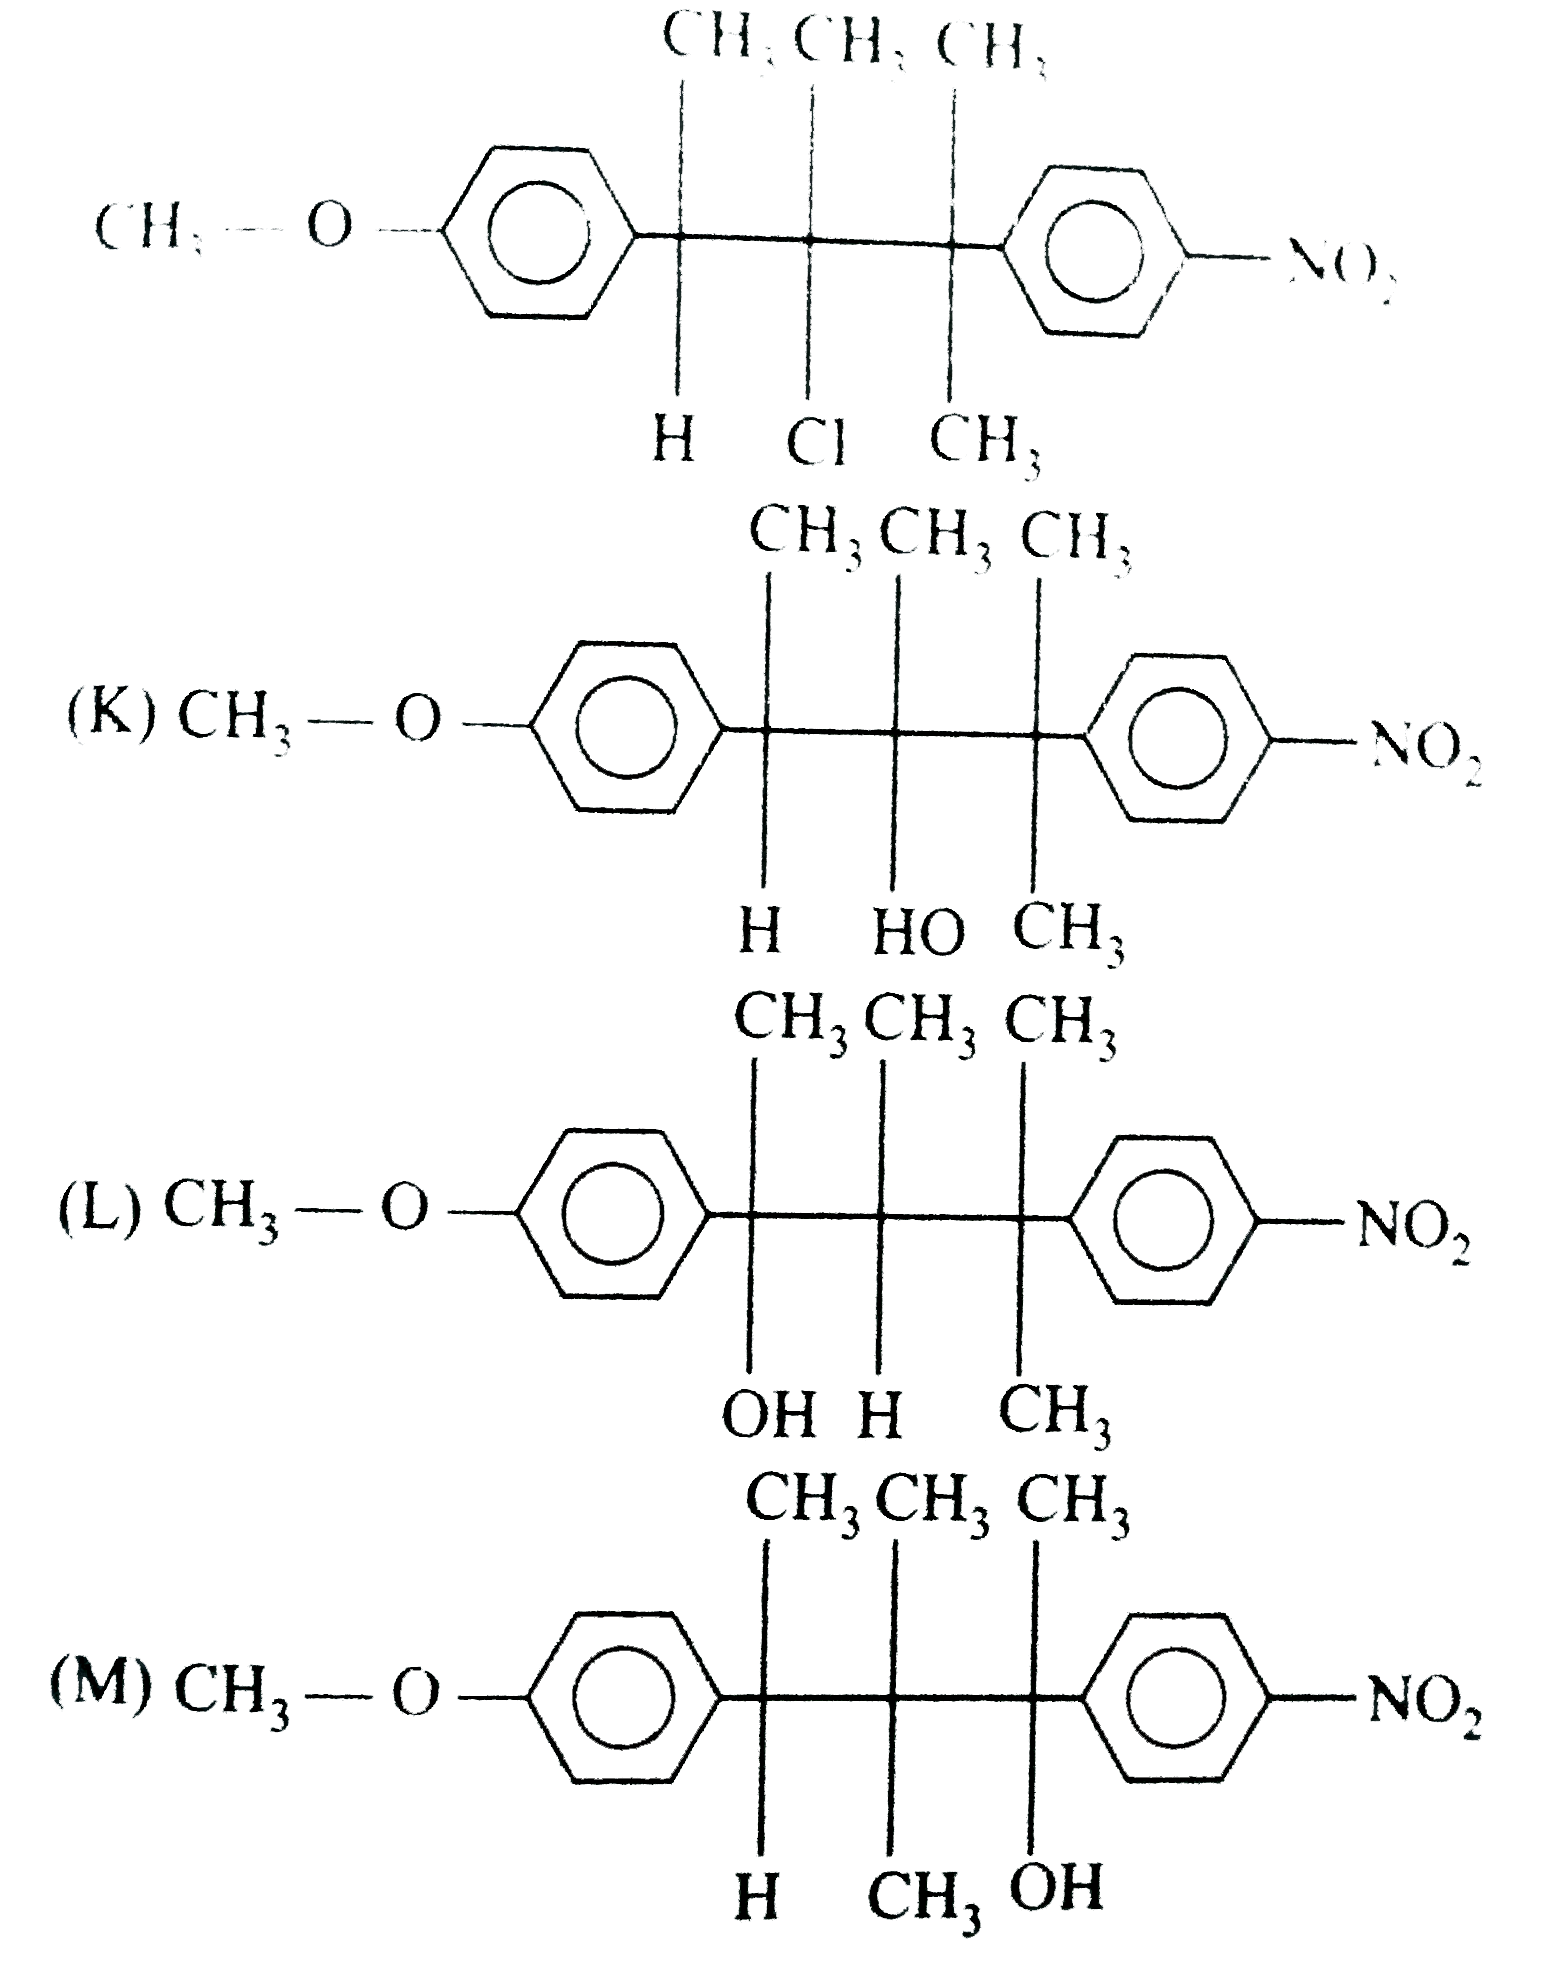 The following compound on hydrolysis in equeous acetone will give .